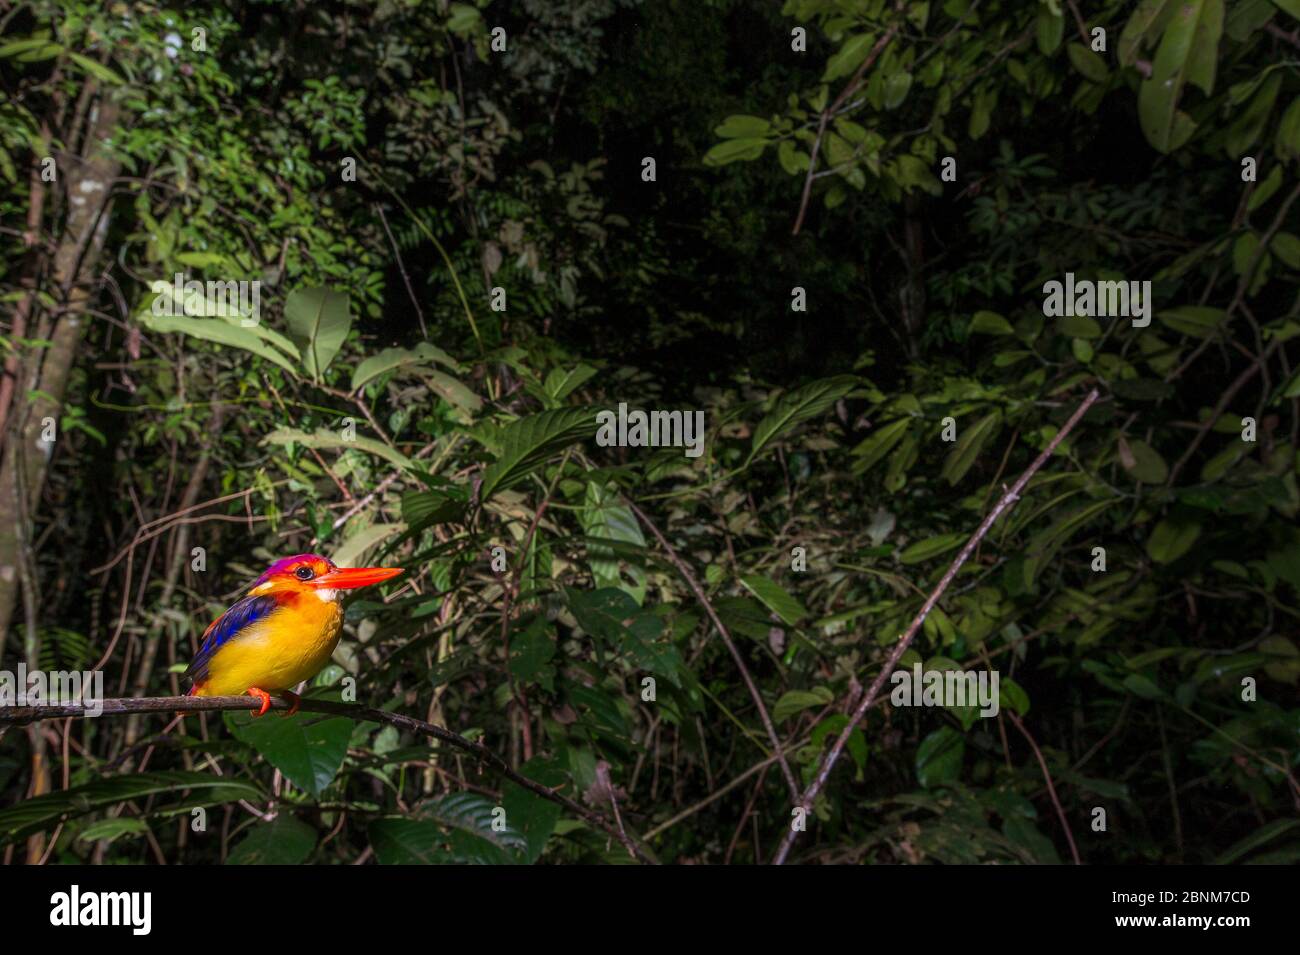 Rufous-backed kingfisher (Ceyx erithaca motleyi) roosting on branch in rainforest understory. Kinabatangan River, Sabah, Borneo. September. Stock Photo